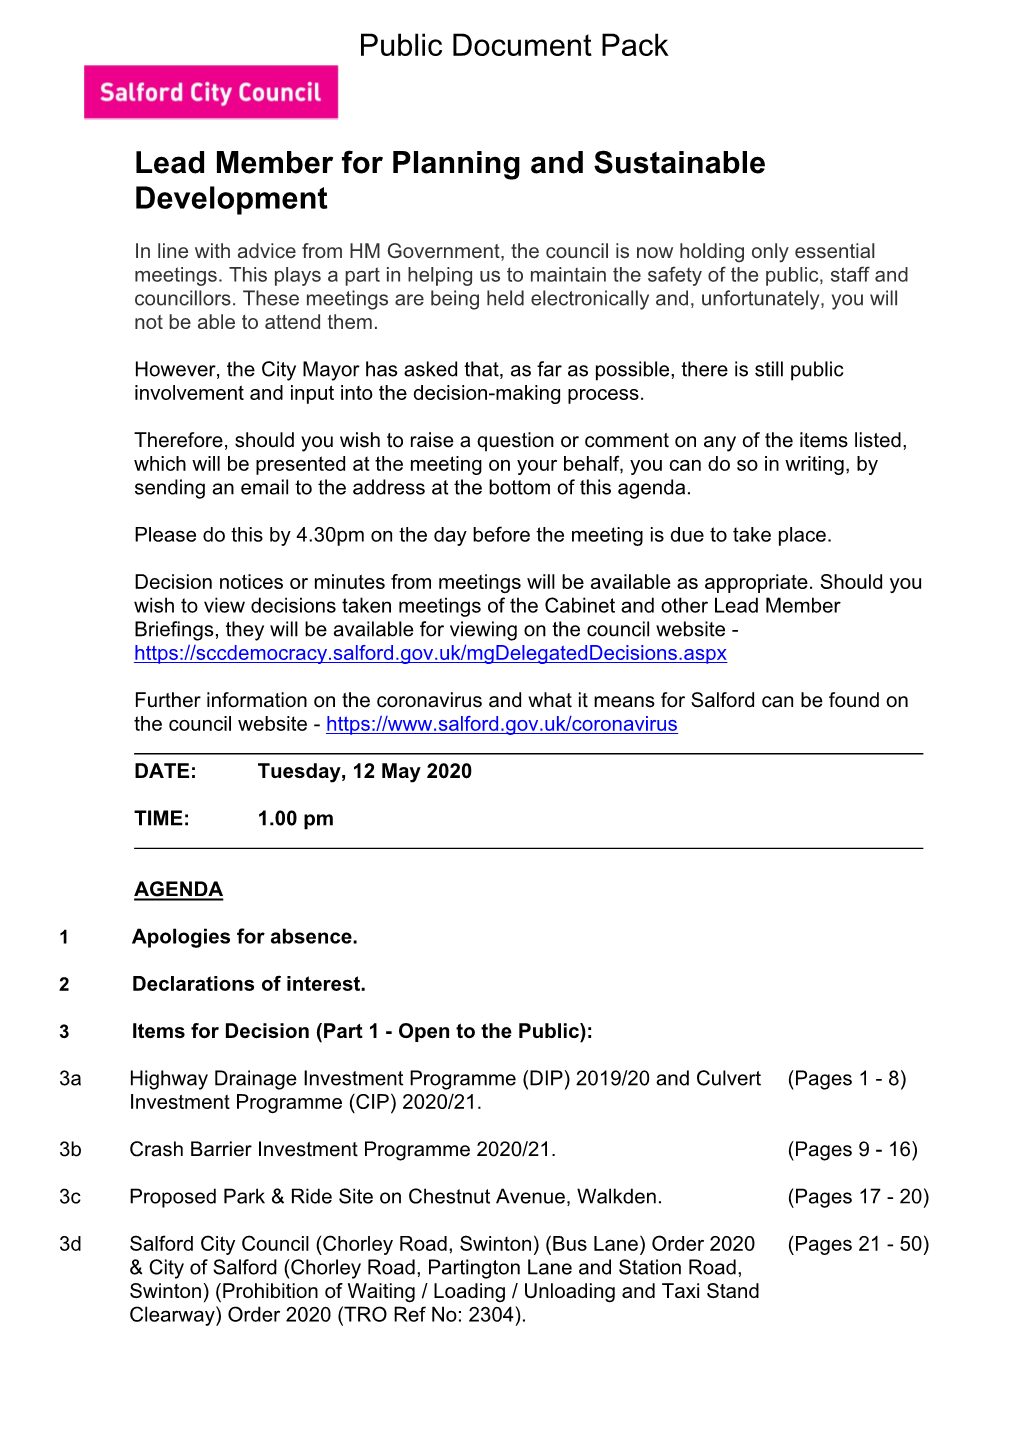 (Public Pack)Agenda Document for Lead Member for Planning And